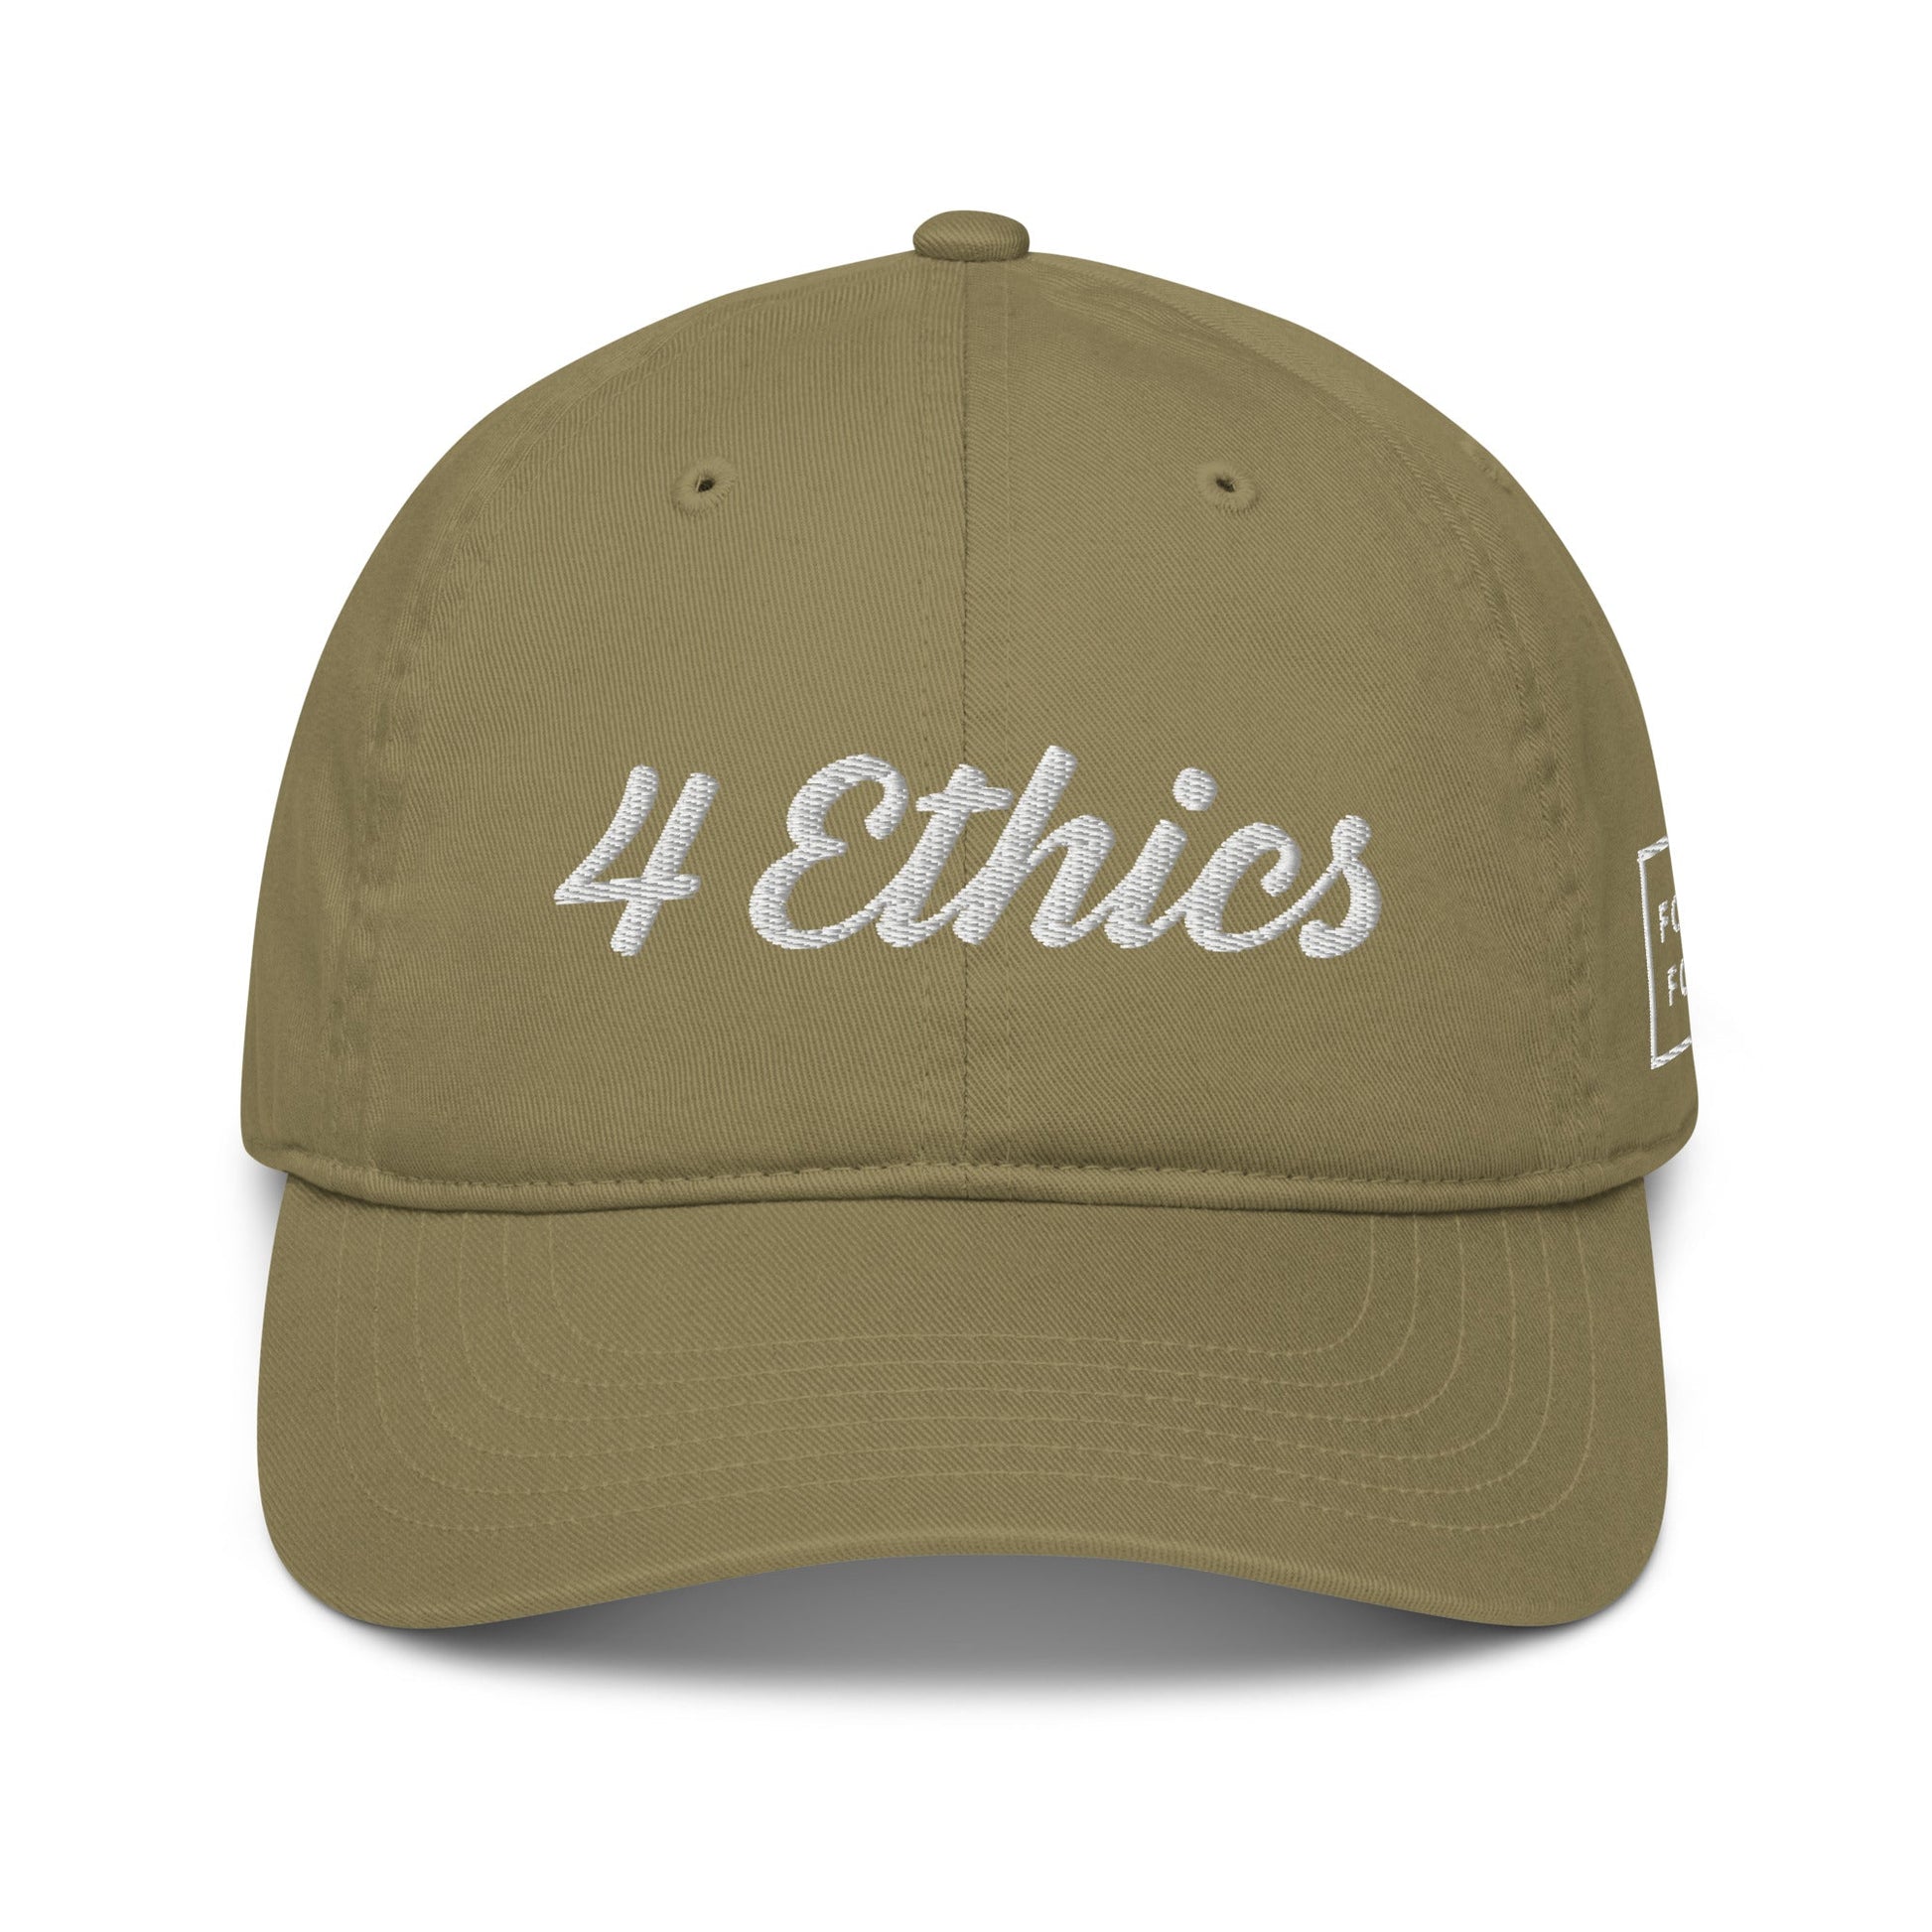 4 Ethics Organic Hat - For Health For Ethics - Jungle - Front